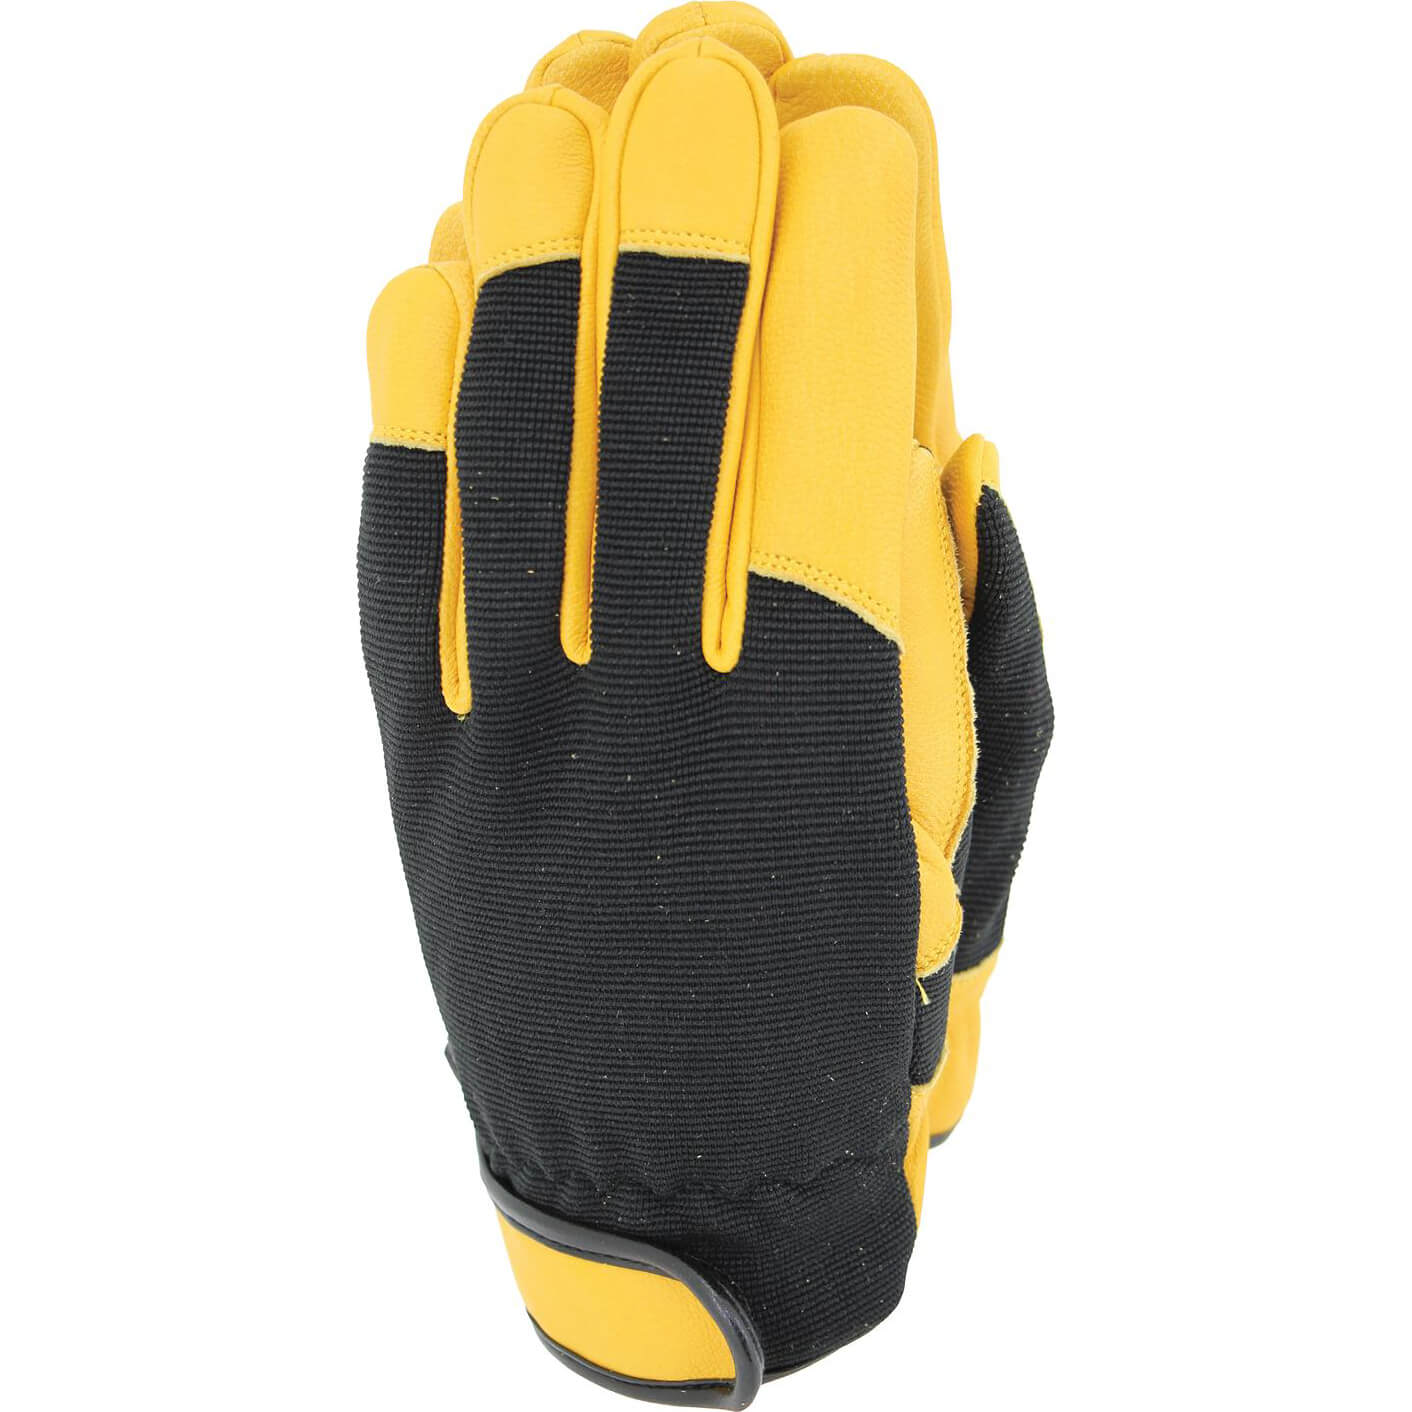 Photo of Town And Country Comfort Fit Gardening Gloves Black / Yellow M